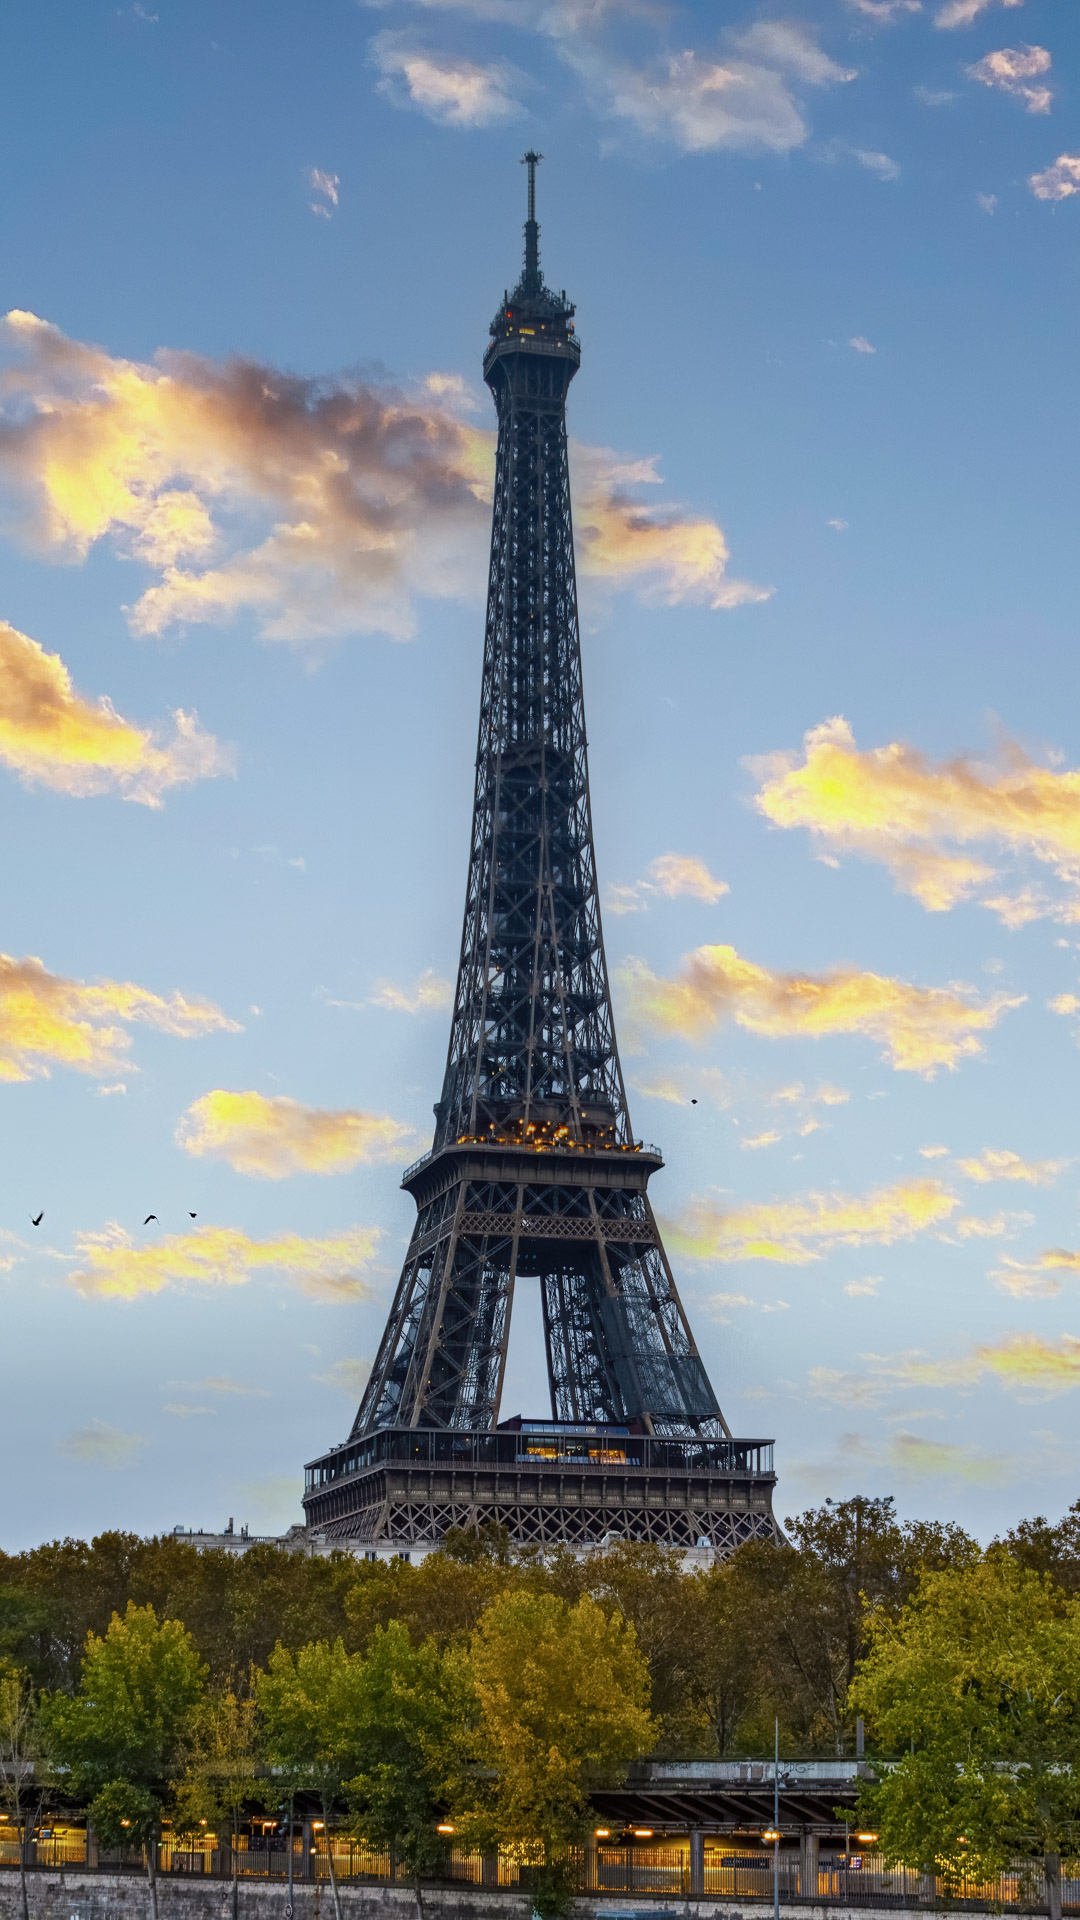 Adorn your screen with the timeless elegance of the Eiffel Tower in Paris with our HD wallpaper.